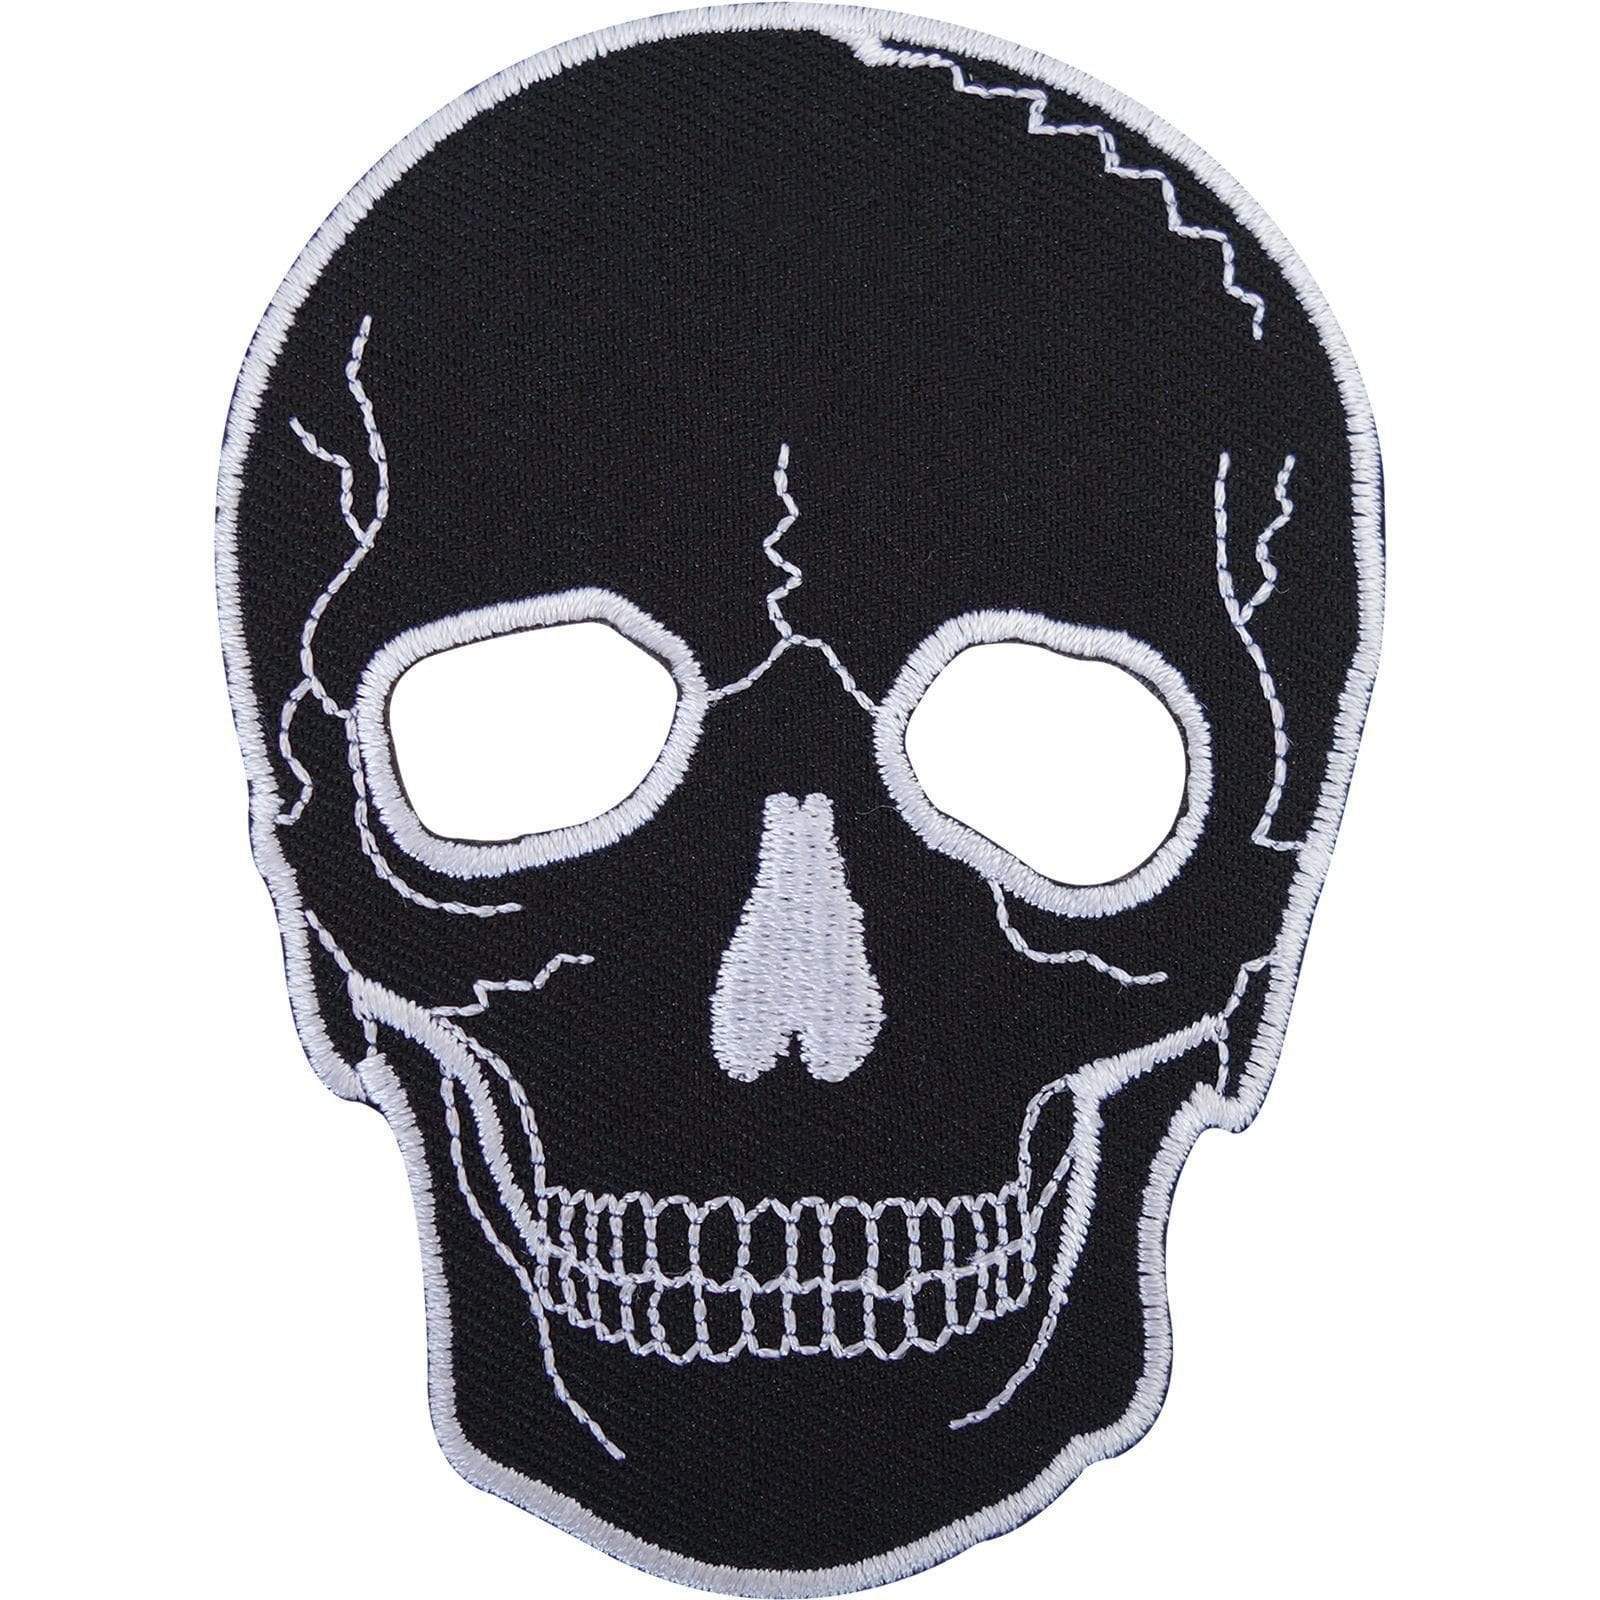 Biker Patch Embroidered Skull Mask Sew On / Iron On Badge for Clothes Bag Jacket